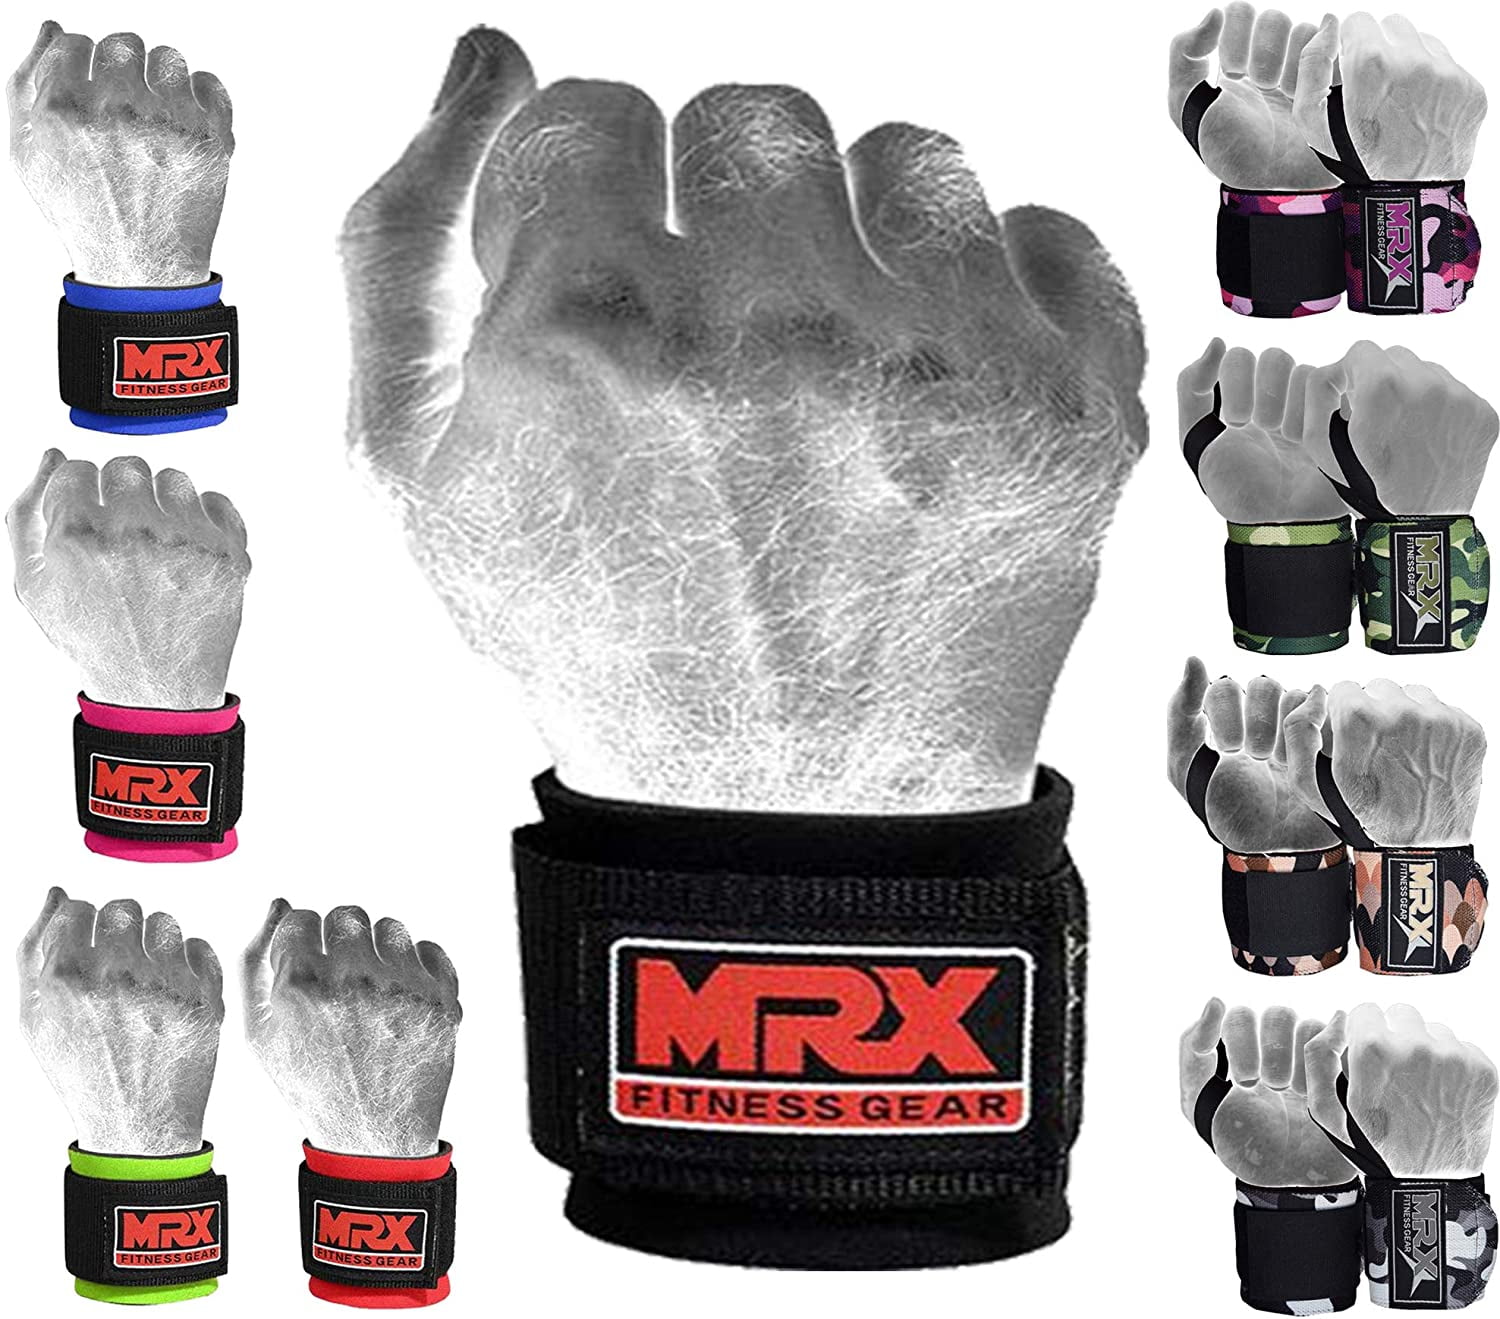 weight lifting Gym Power training wrist wraps straps work out cross fit support 